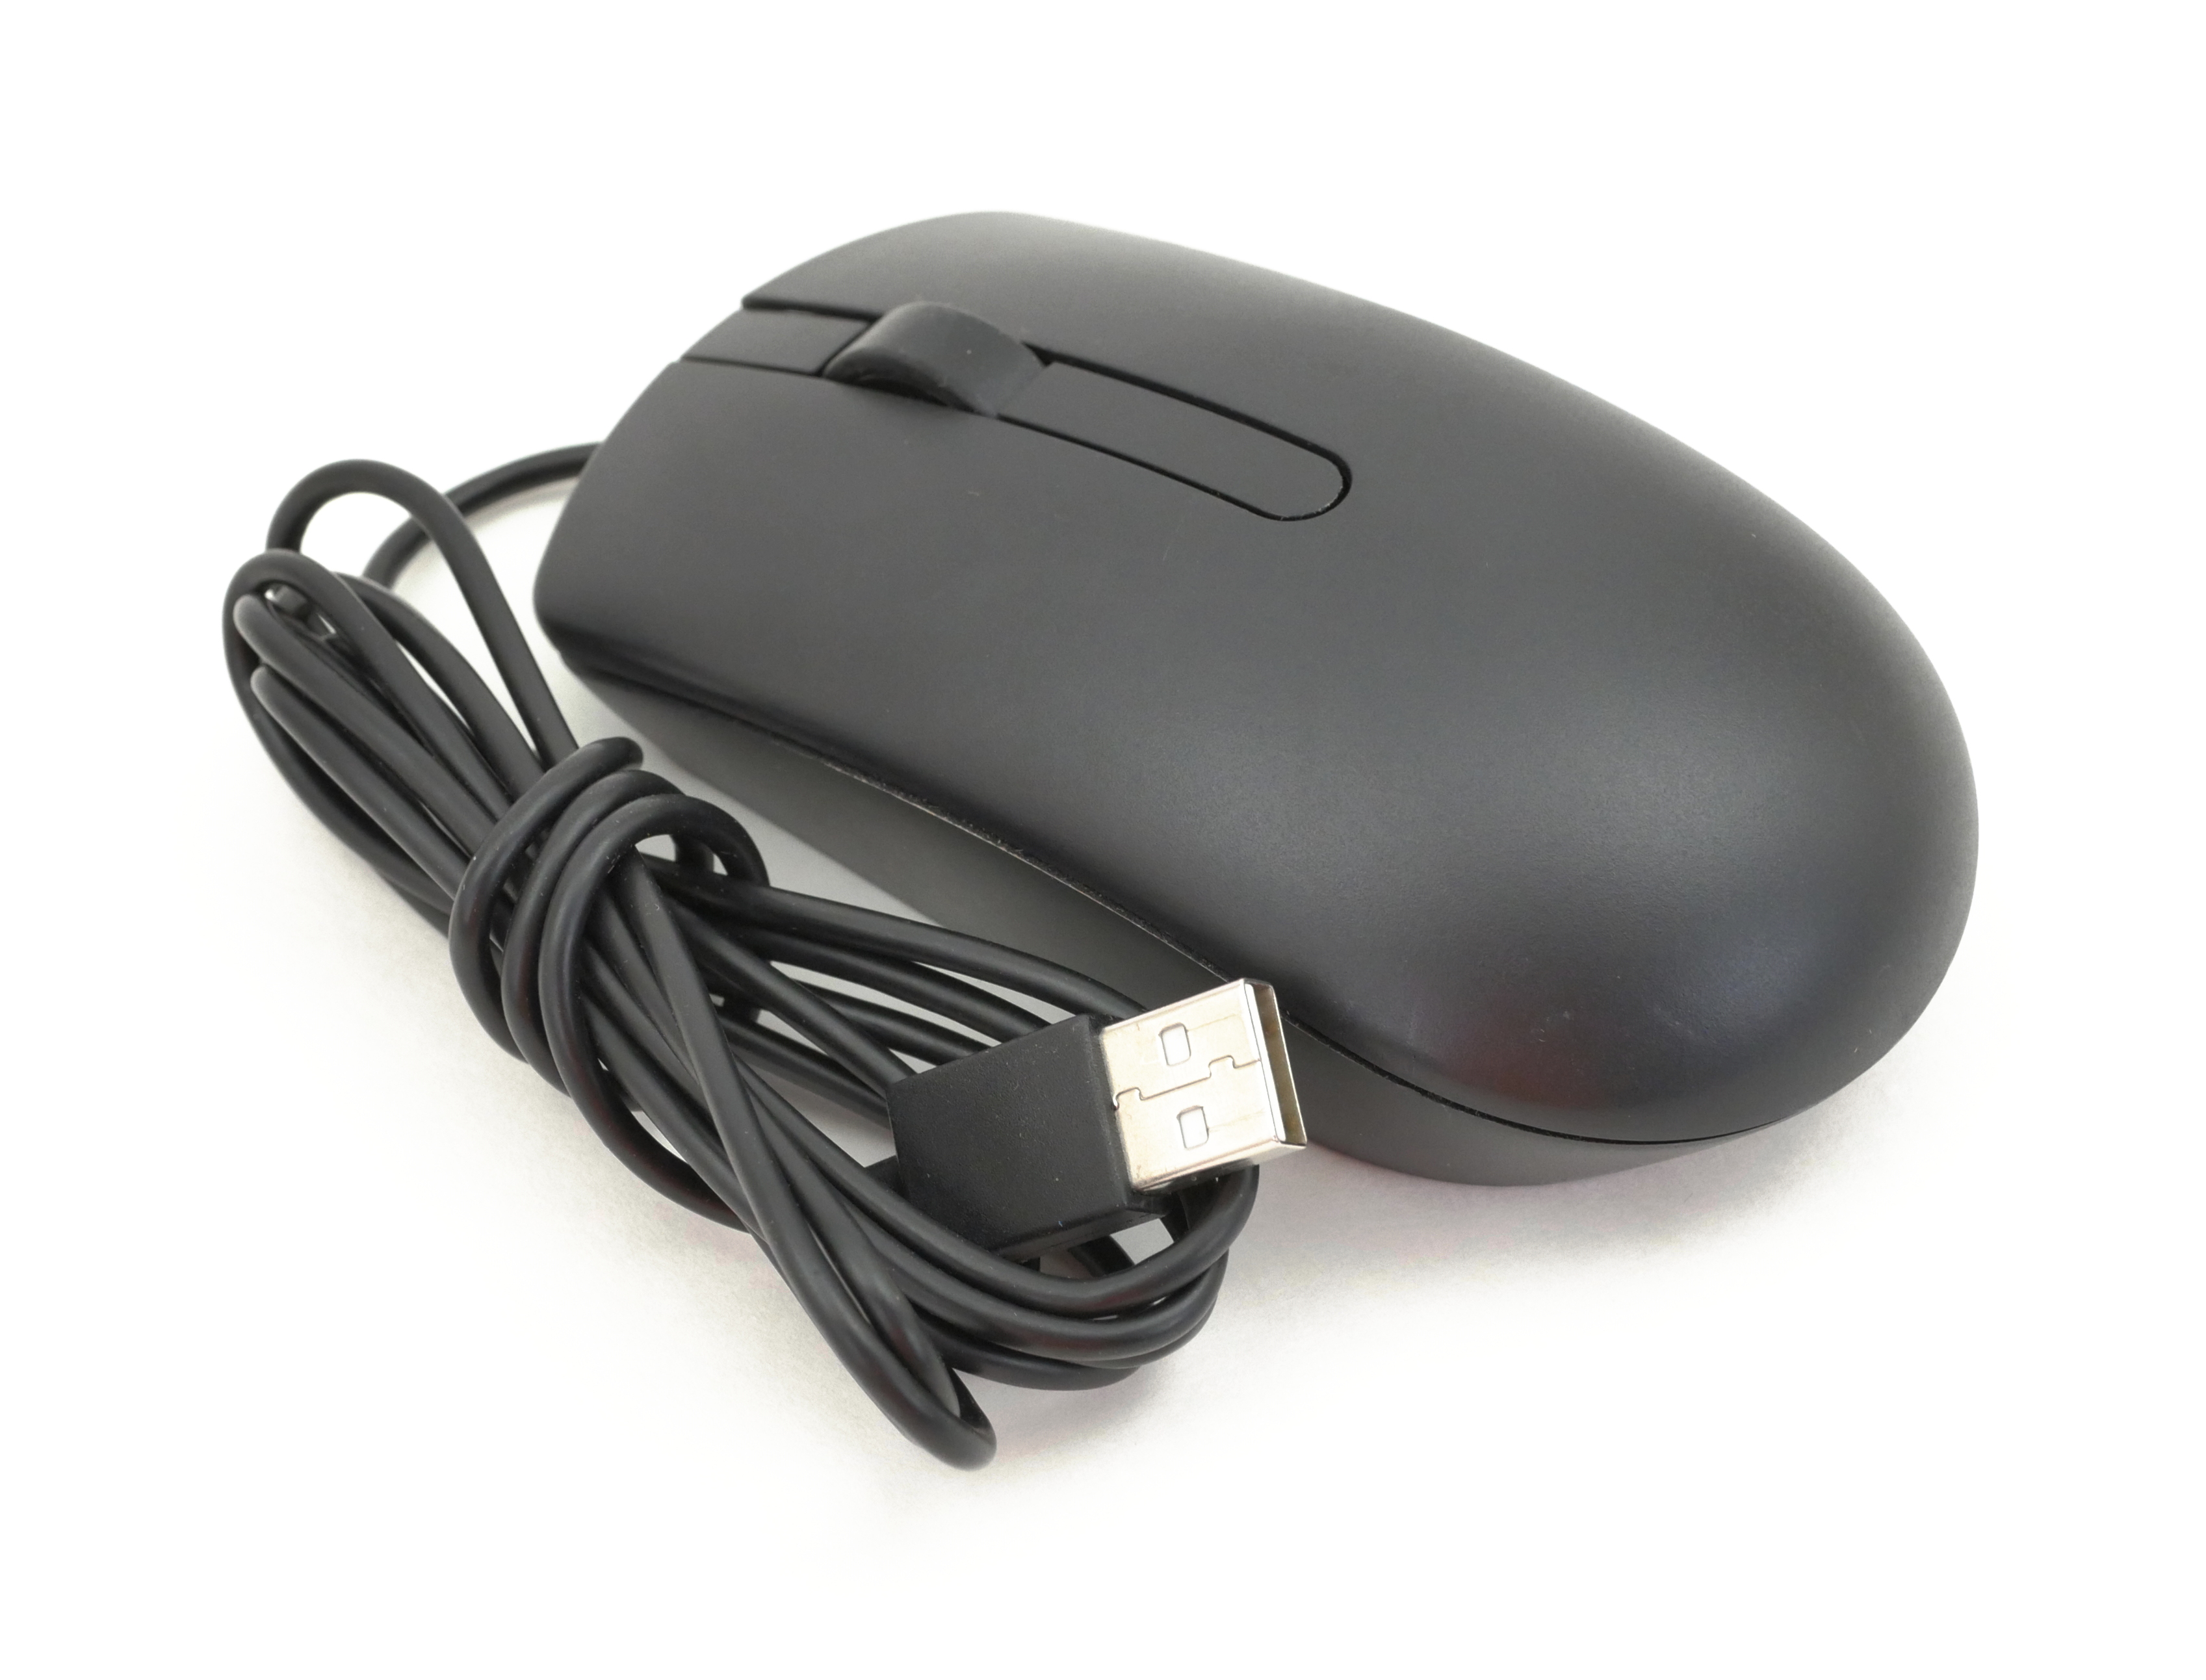 Dell OEM MS116P USB 3-Button Optical Mouse Scroll Wired MG46T